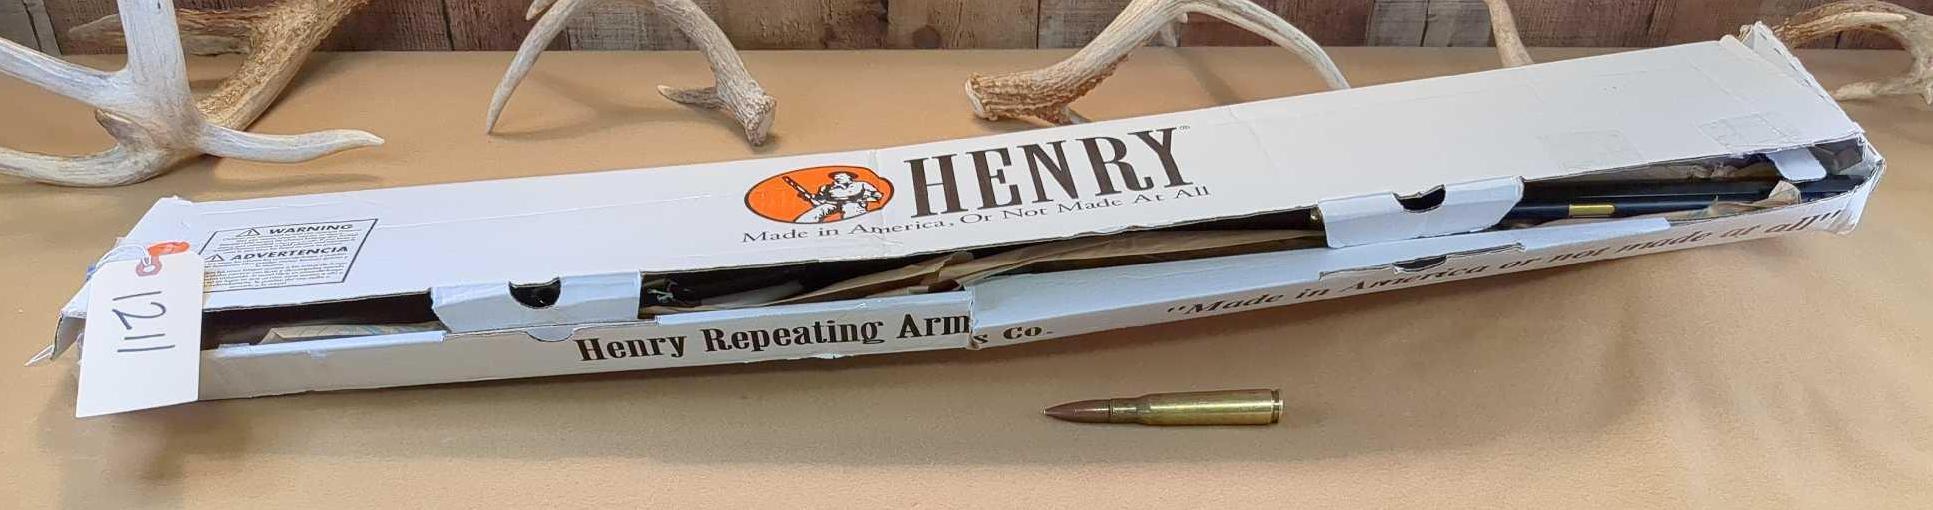 HENRY REPEATING ARMS CO. MODEL H004AF AMERICAN FARMER - GOLDEN BOY .22 LR LEVER ACTION RIFLE